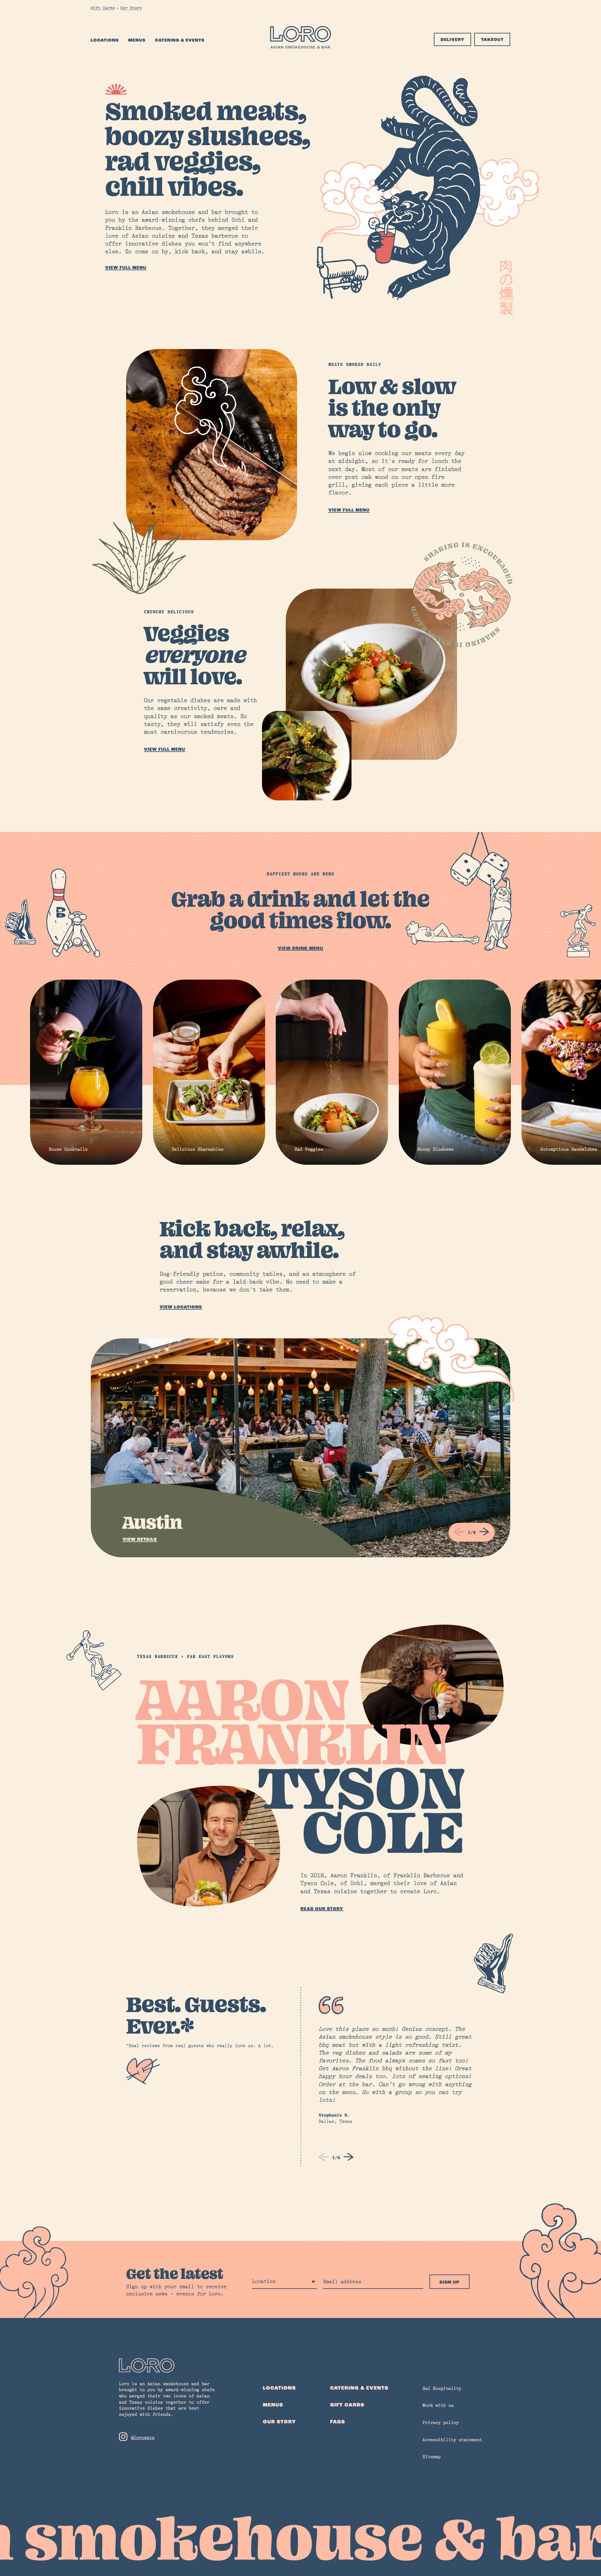 Loro Landing Page Example: Loro is an Asian smokehouse and bar brought to you by the award-winning chefs behind Uchi and Franklin Barbecue.